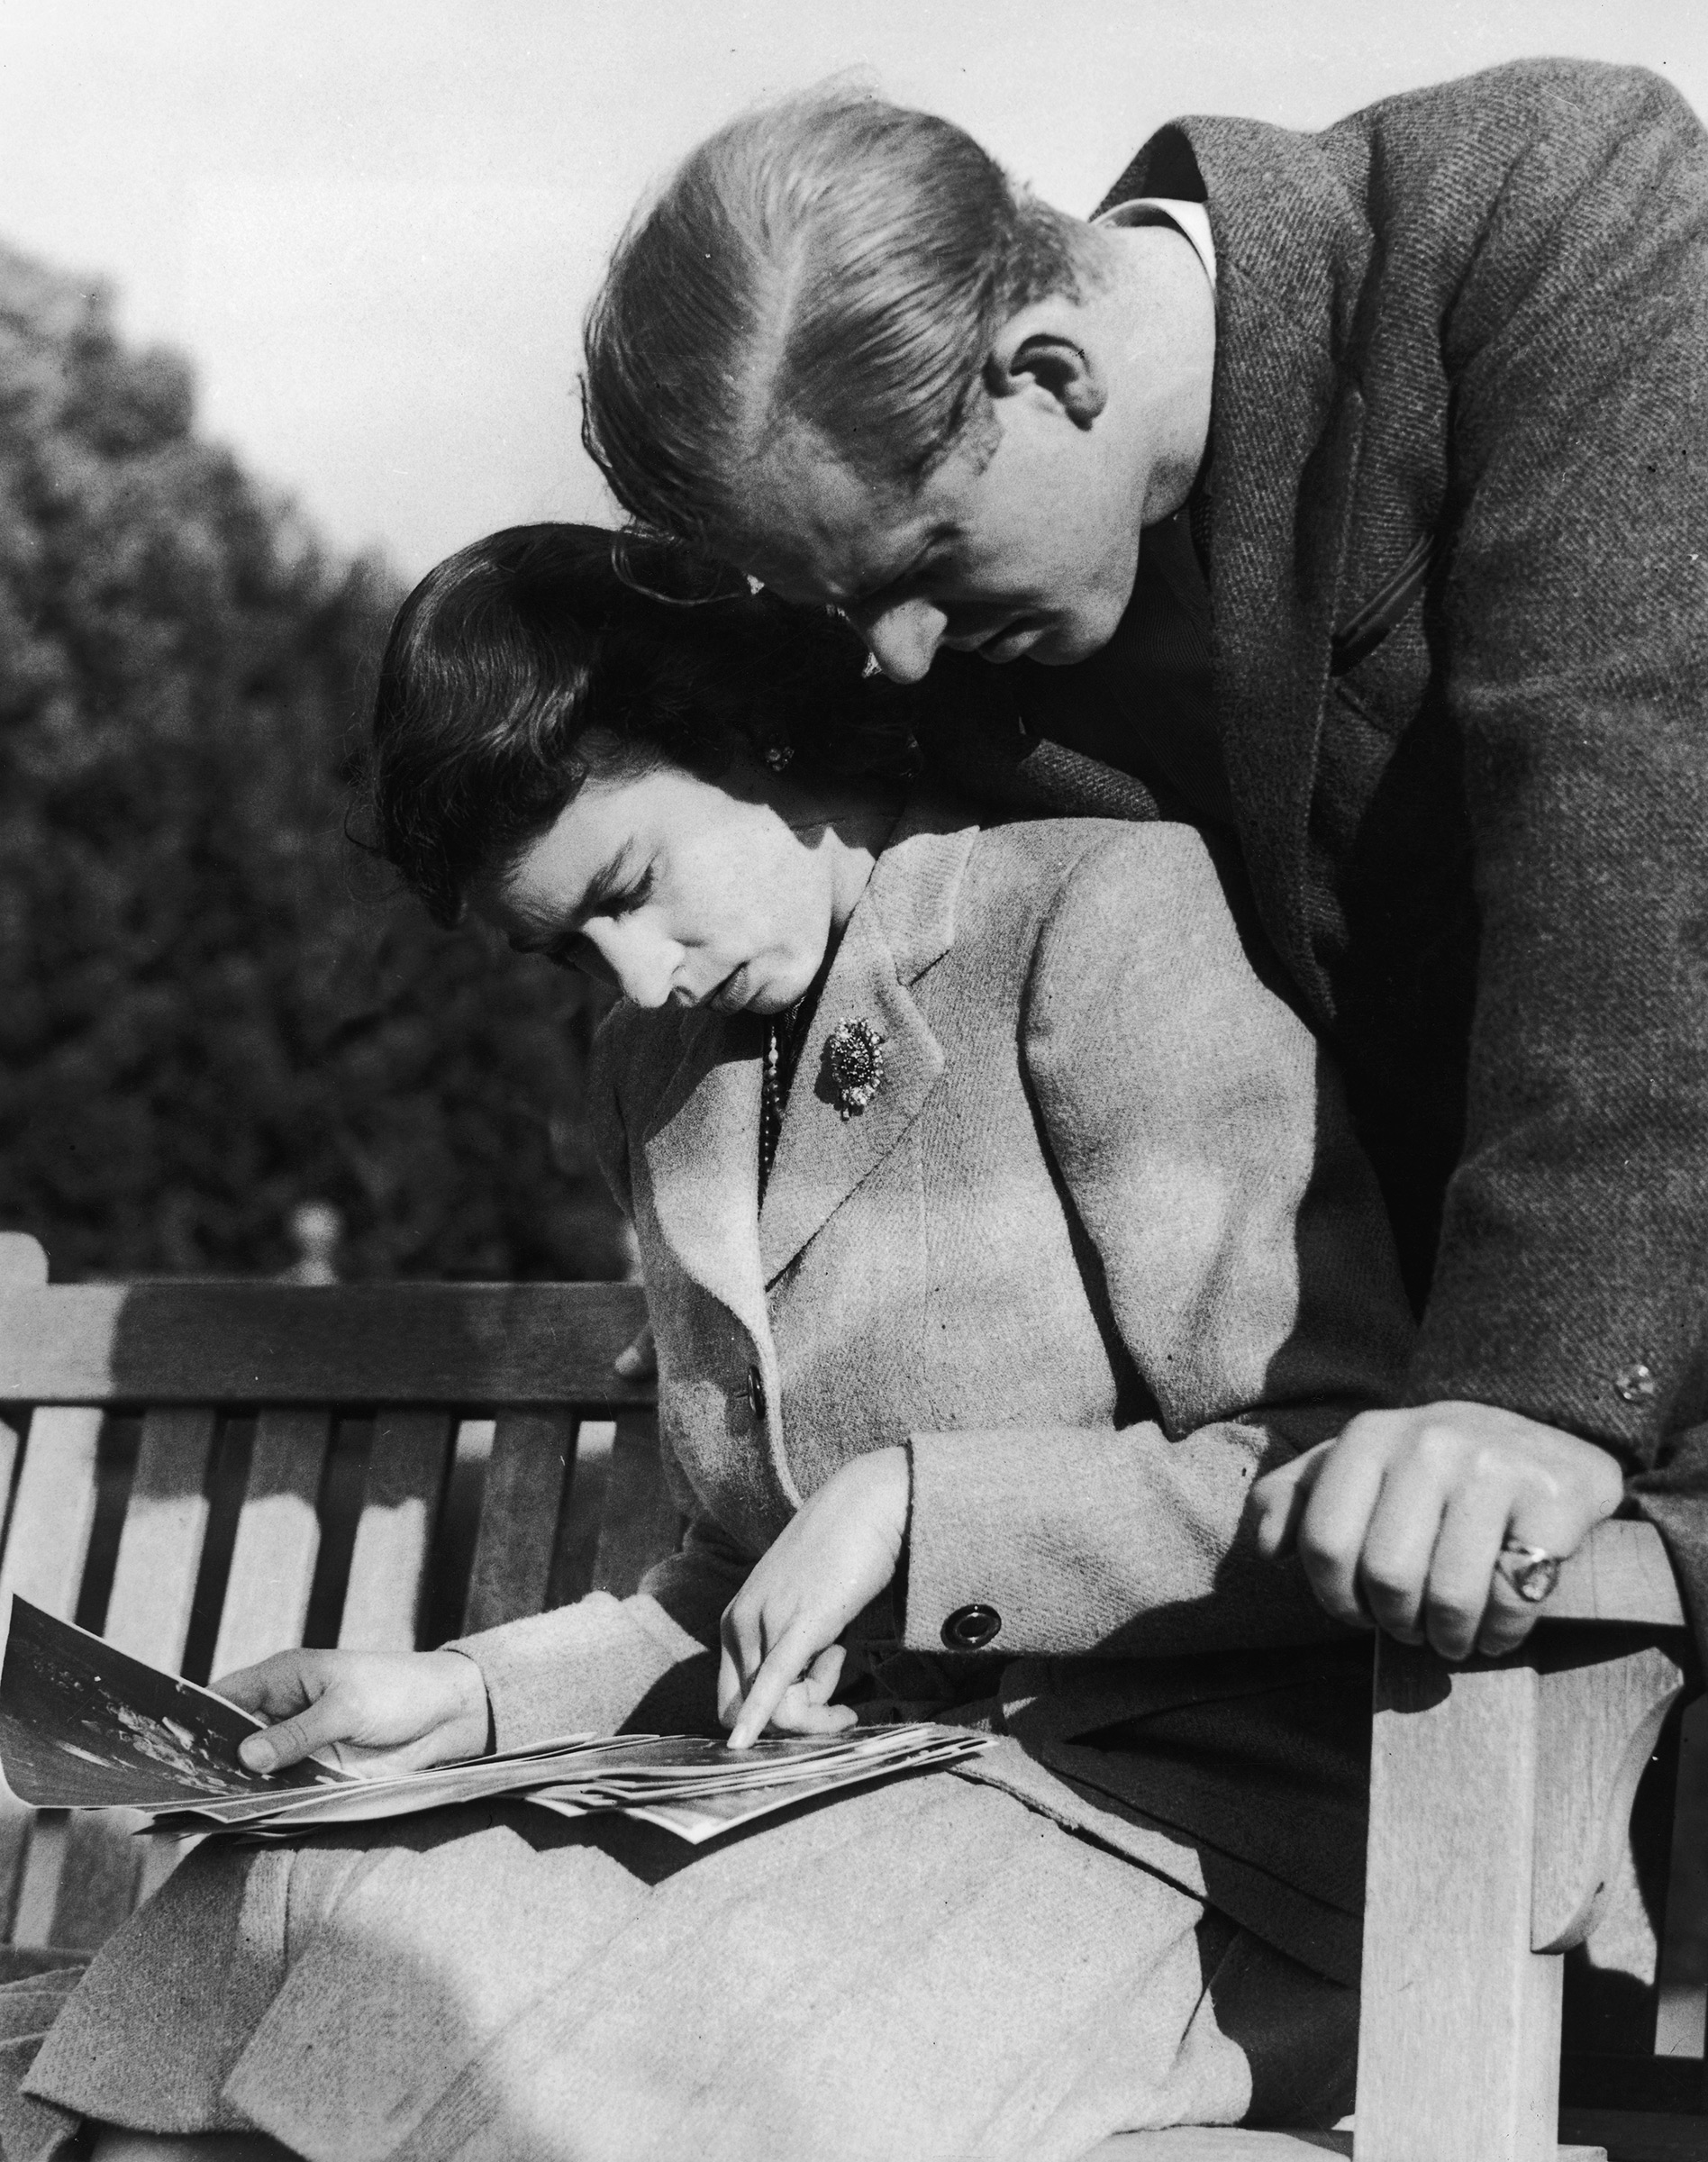 Princess Elizabeth and Philip Mountbatten look at their wedding photographs while on honeymoon in Romsey, Hampshire, Nov. 1947.